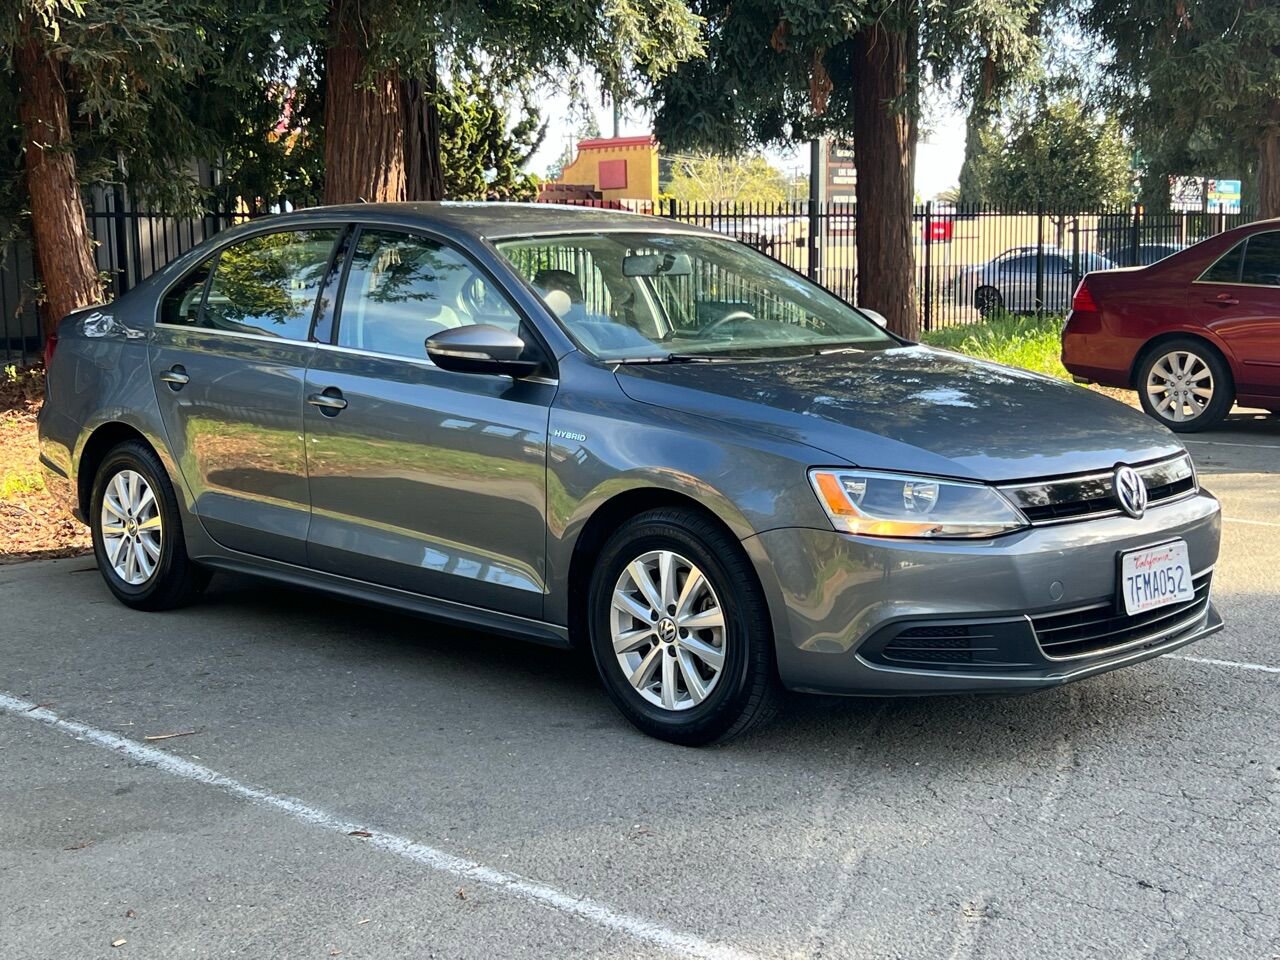 Used Volkswagen Jetta Hybrid for Sale Right Now - Autotrader